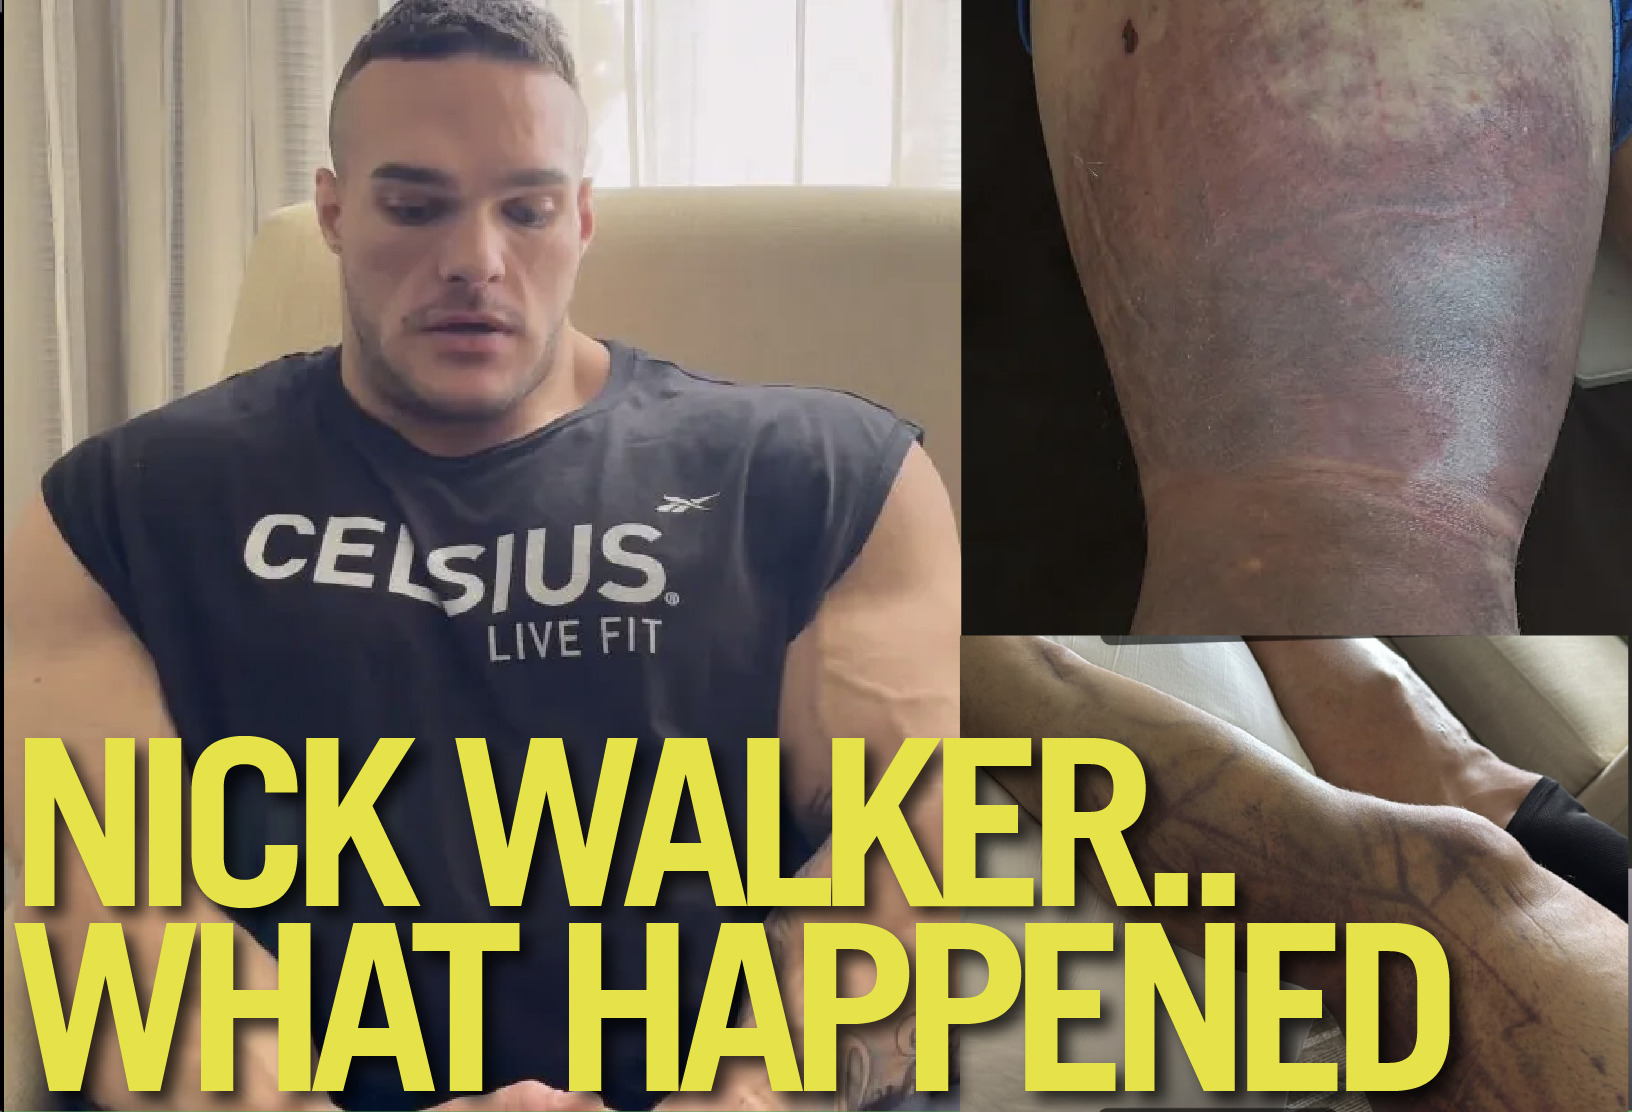 Will Nick Walker be Affected by What Happened to him?